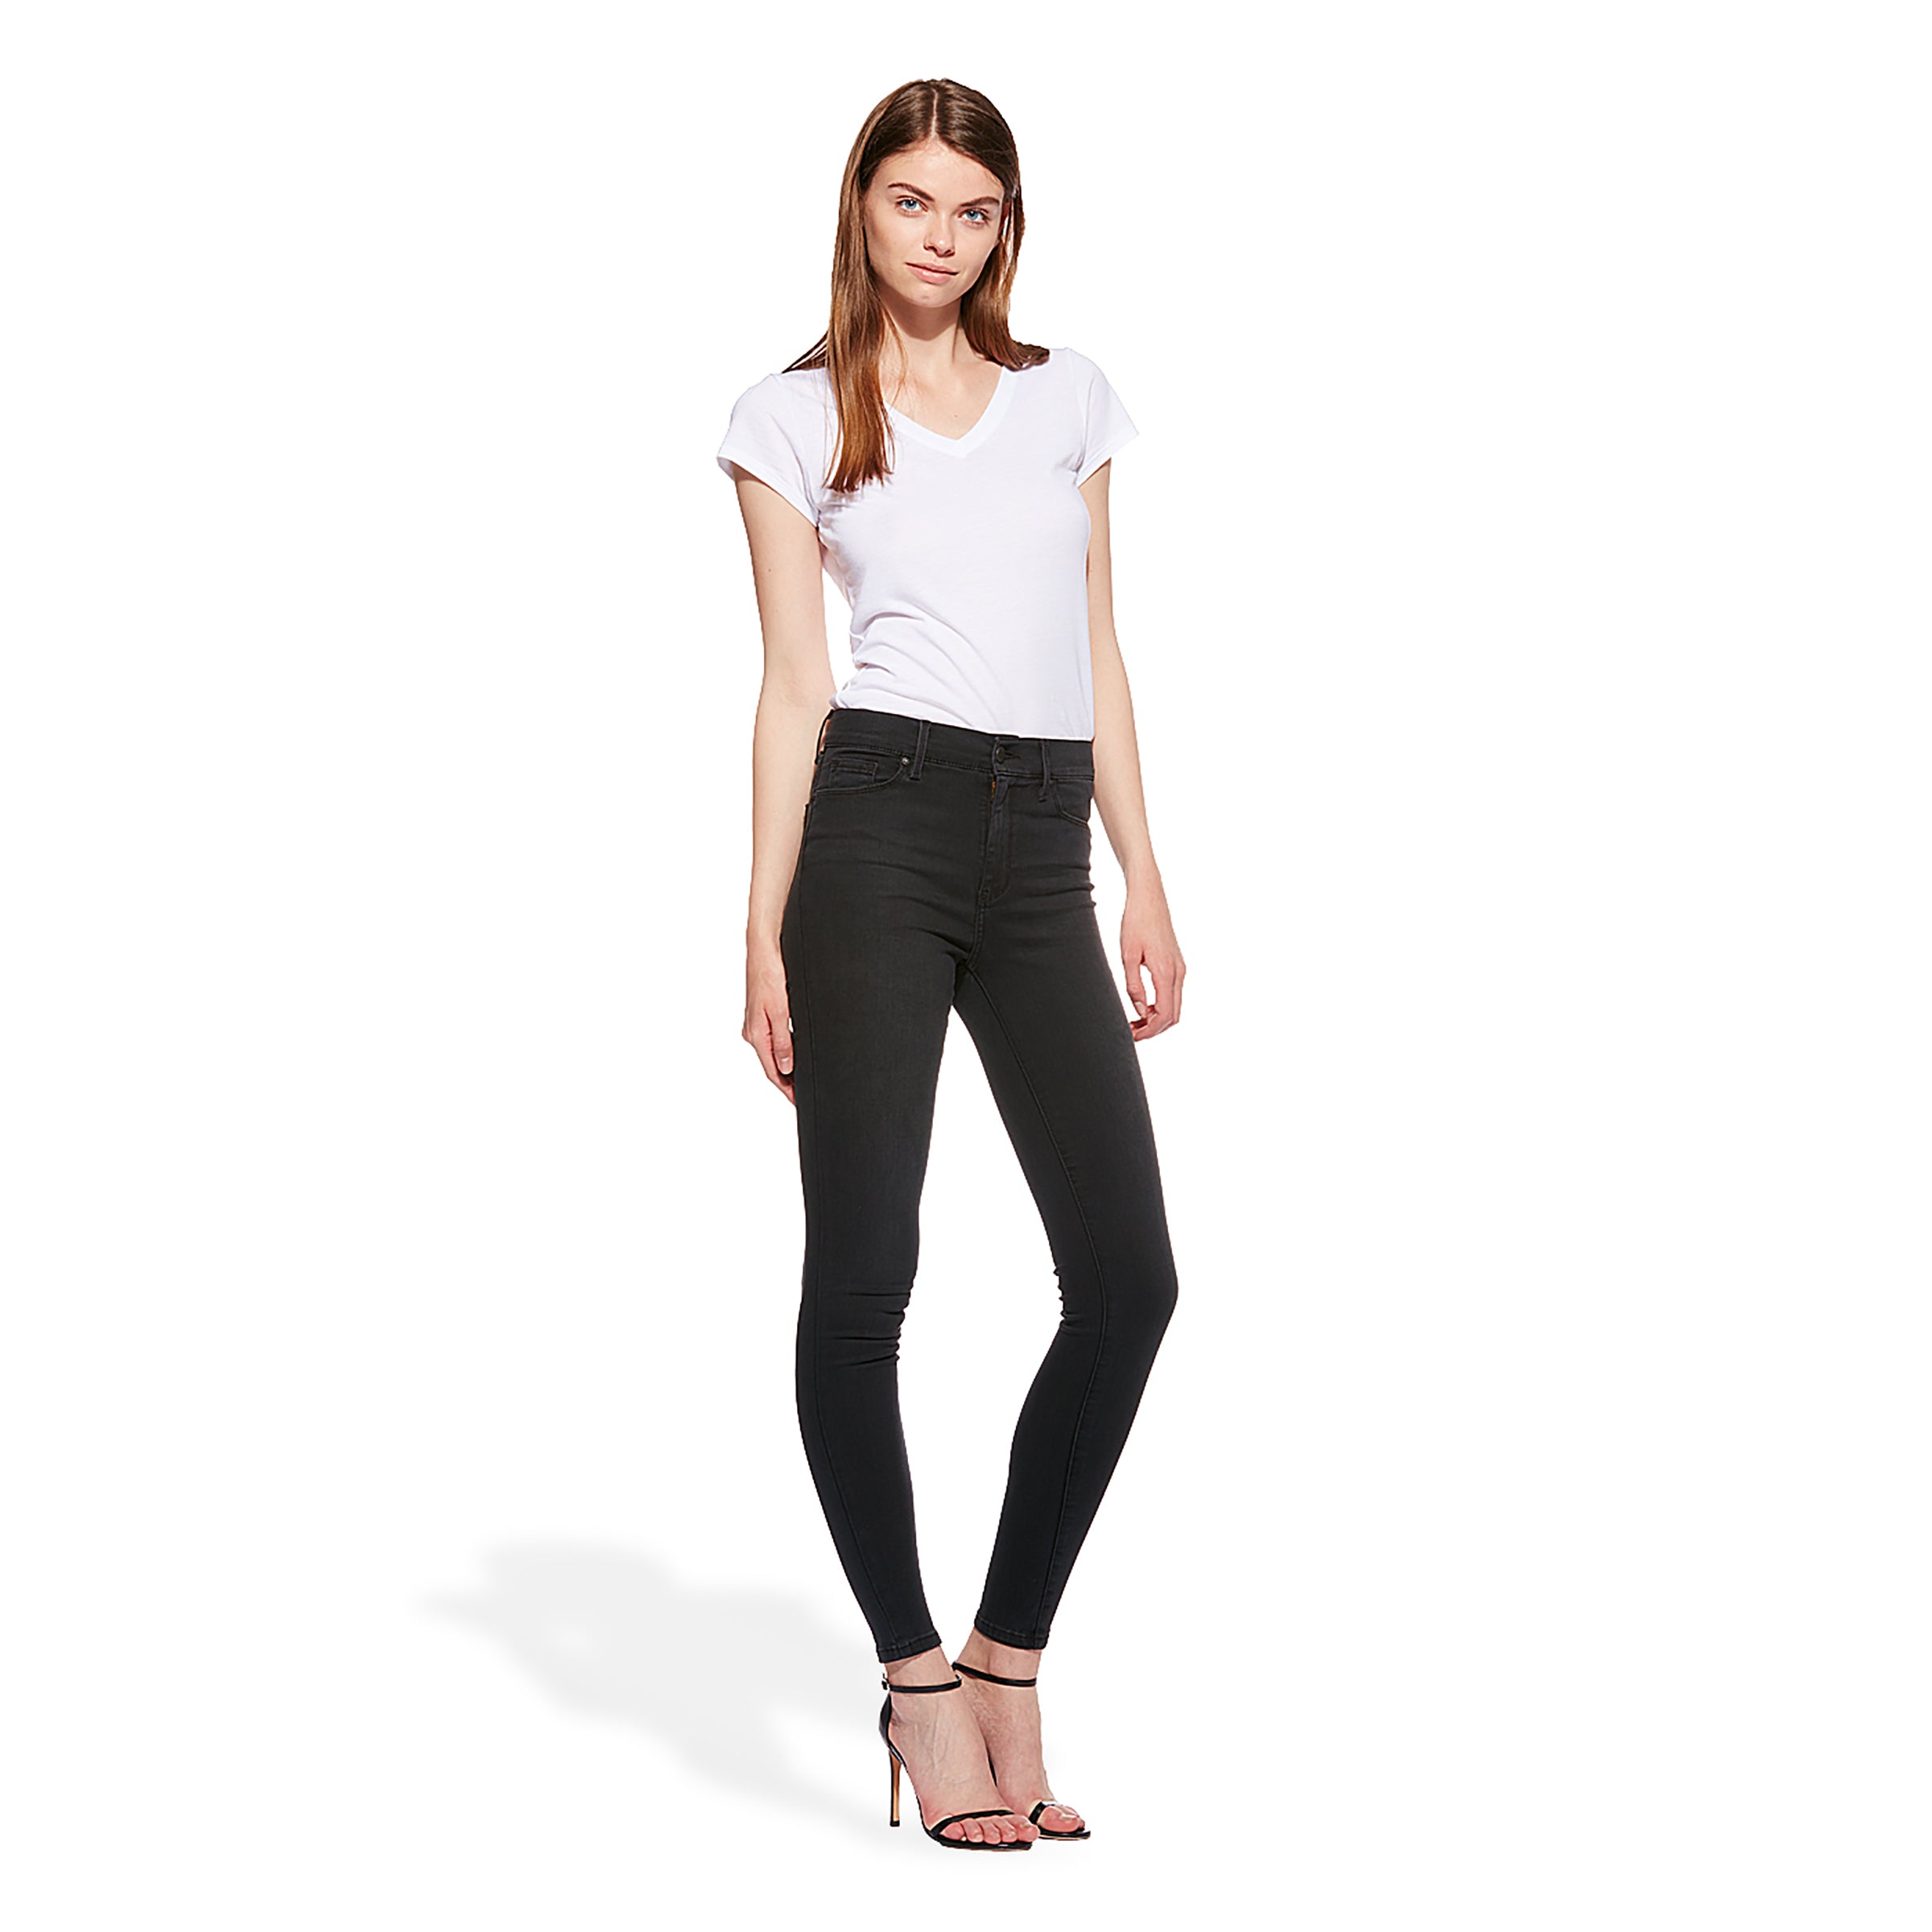 Women wearing Gris oscuro High Rise Skinny Orchard Jeans